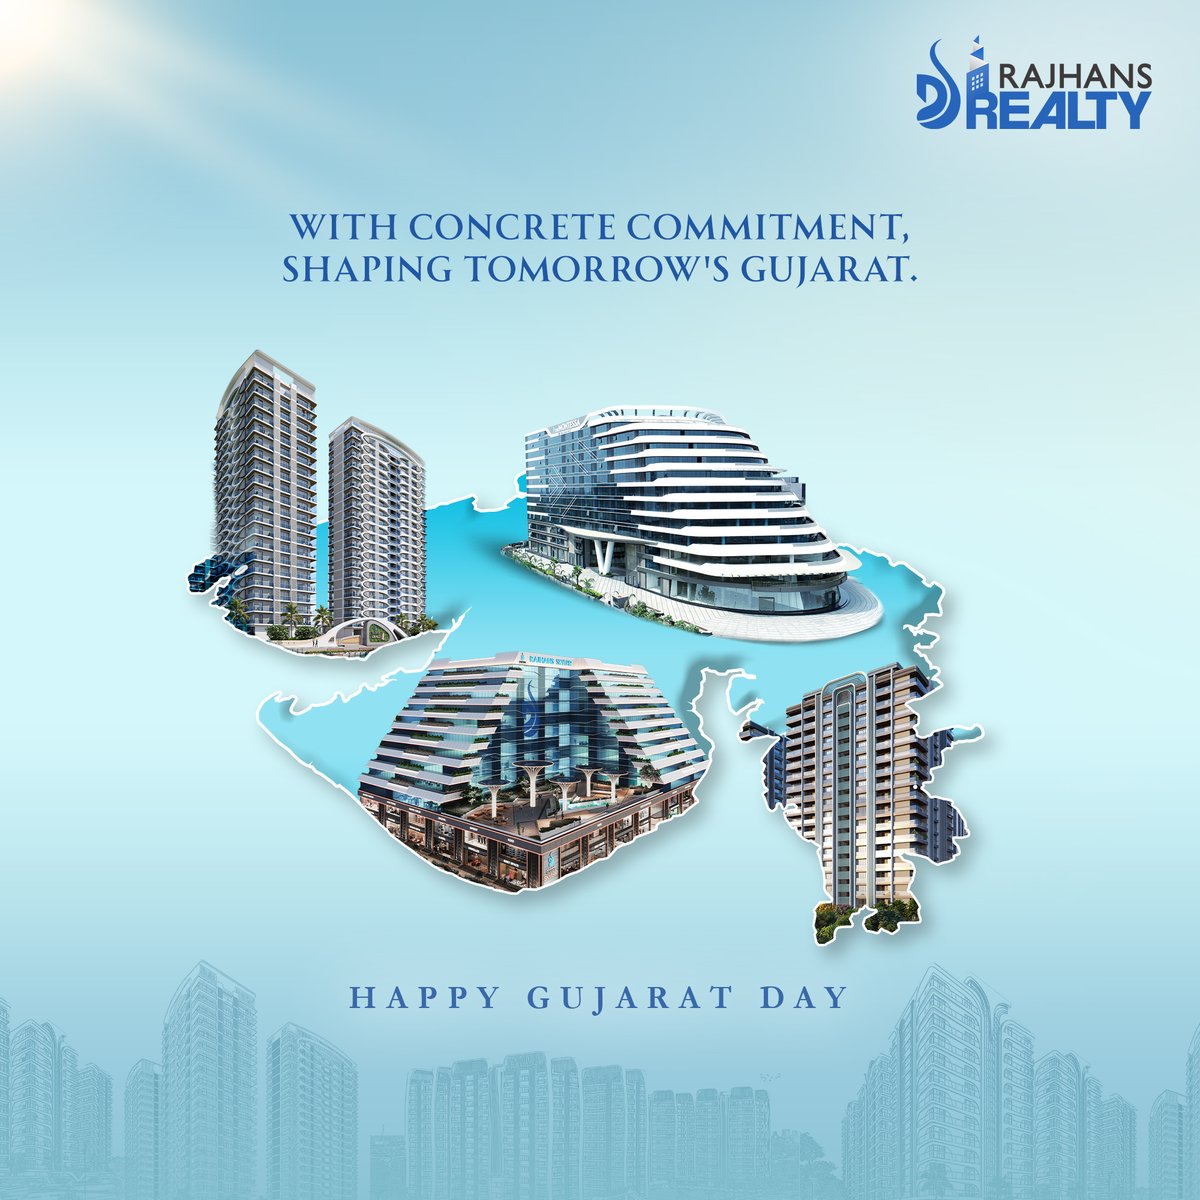 Through visionary projects and unwavering commitment, we're sculpting a brighter tomorrow for Gujarat

Happy Gujarat Day!

#HappyGujaratDay #RajhansRealty #RajhansGroup